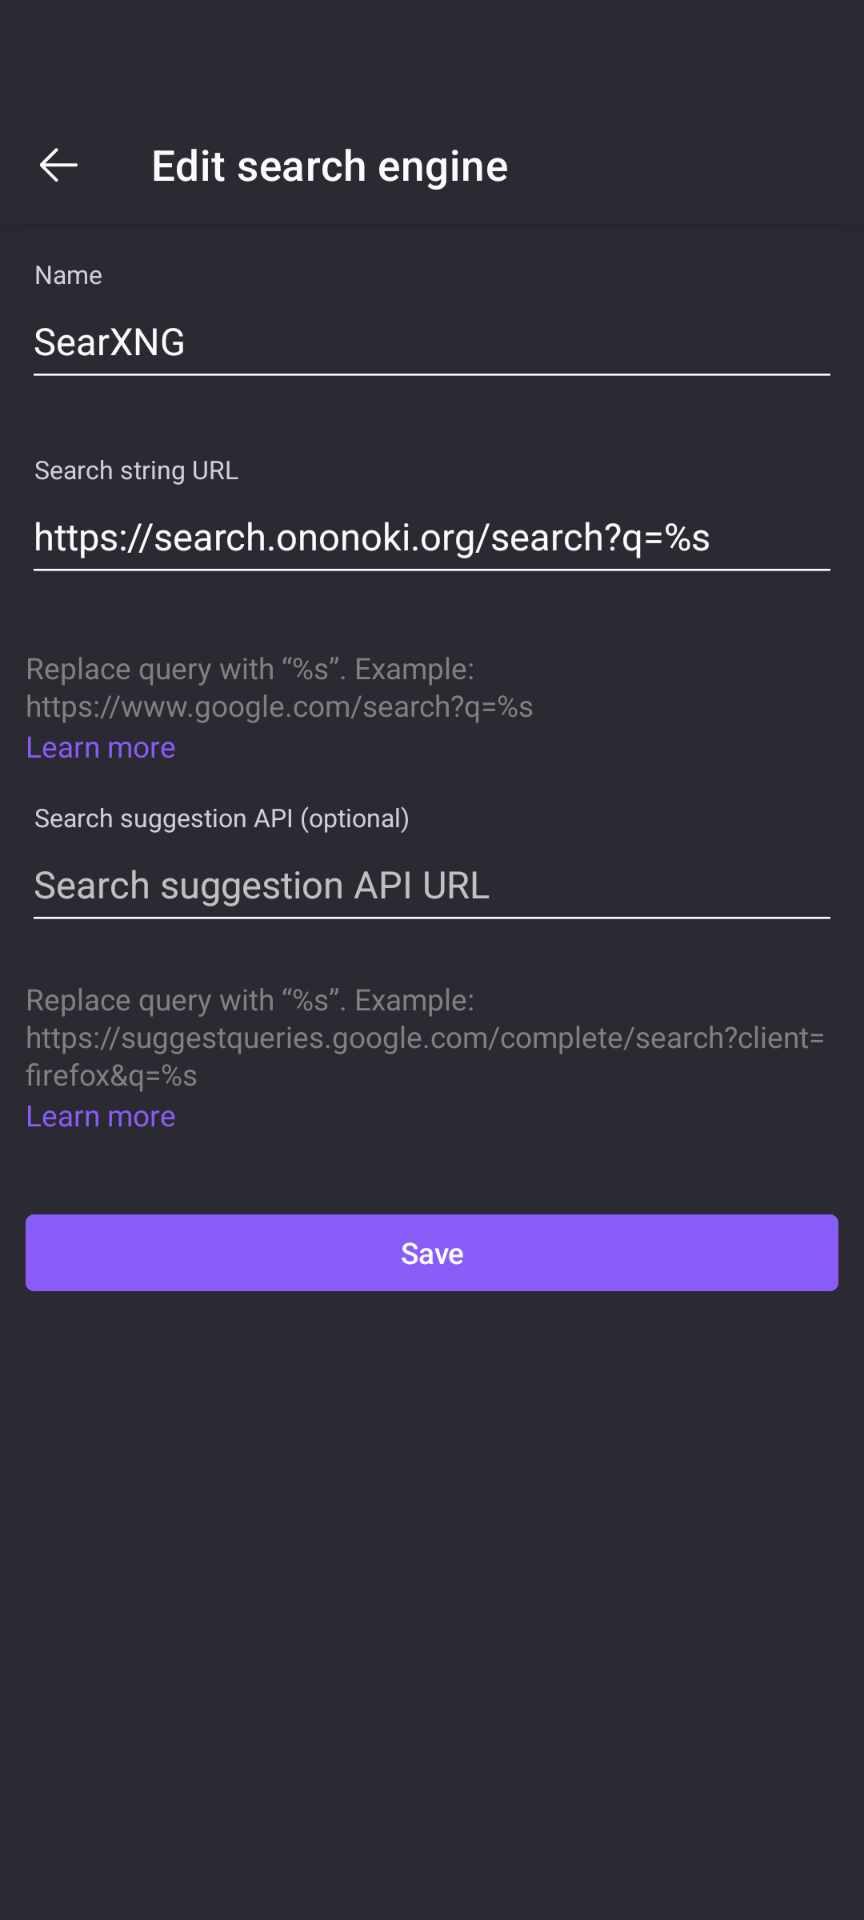 Screenshot of the Edit Search Engine screen on Firefox for Android. The name is listed as "SearXNG". The search string URL is "https://search.ononoki.org/search?q=%s" . The Search Suggestion API is blank.